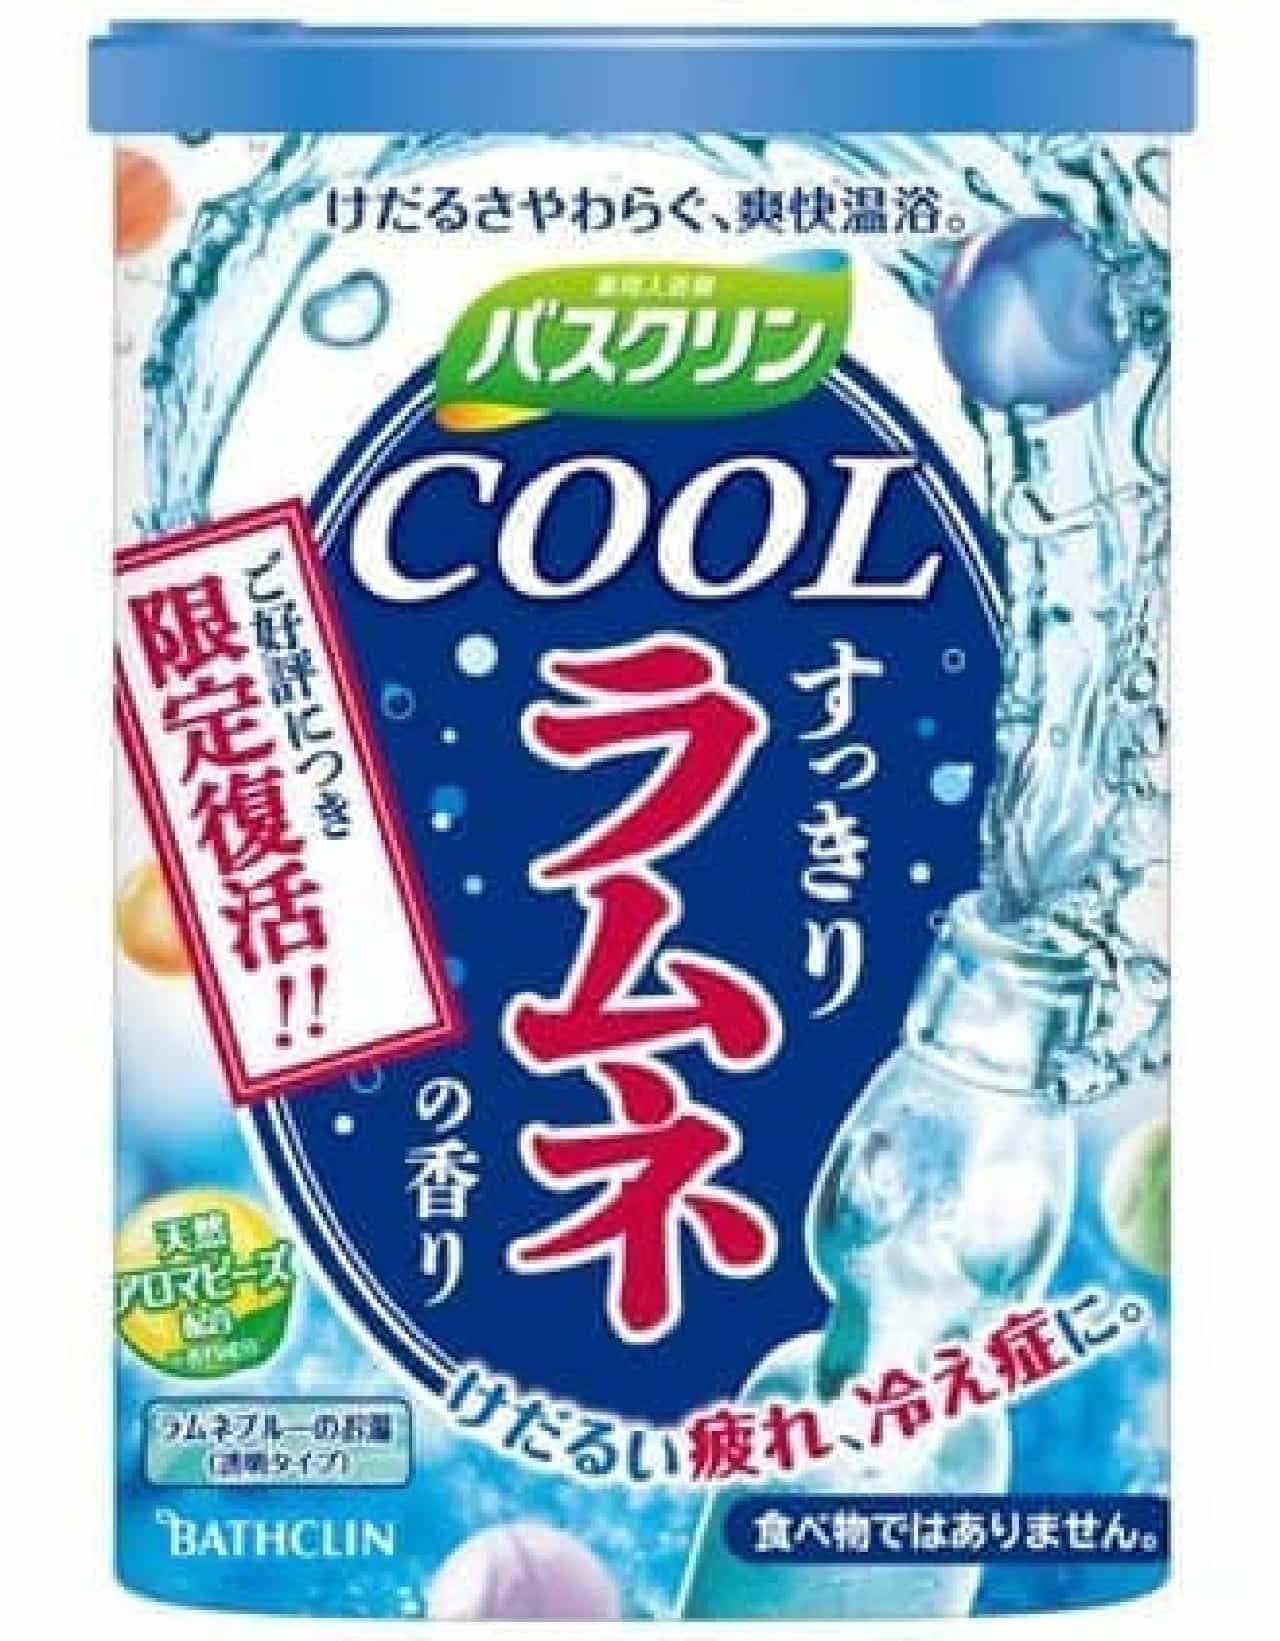 How about a bath in Ramune, a summer tradition?